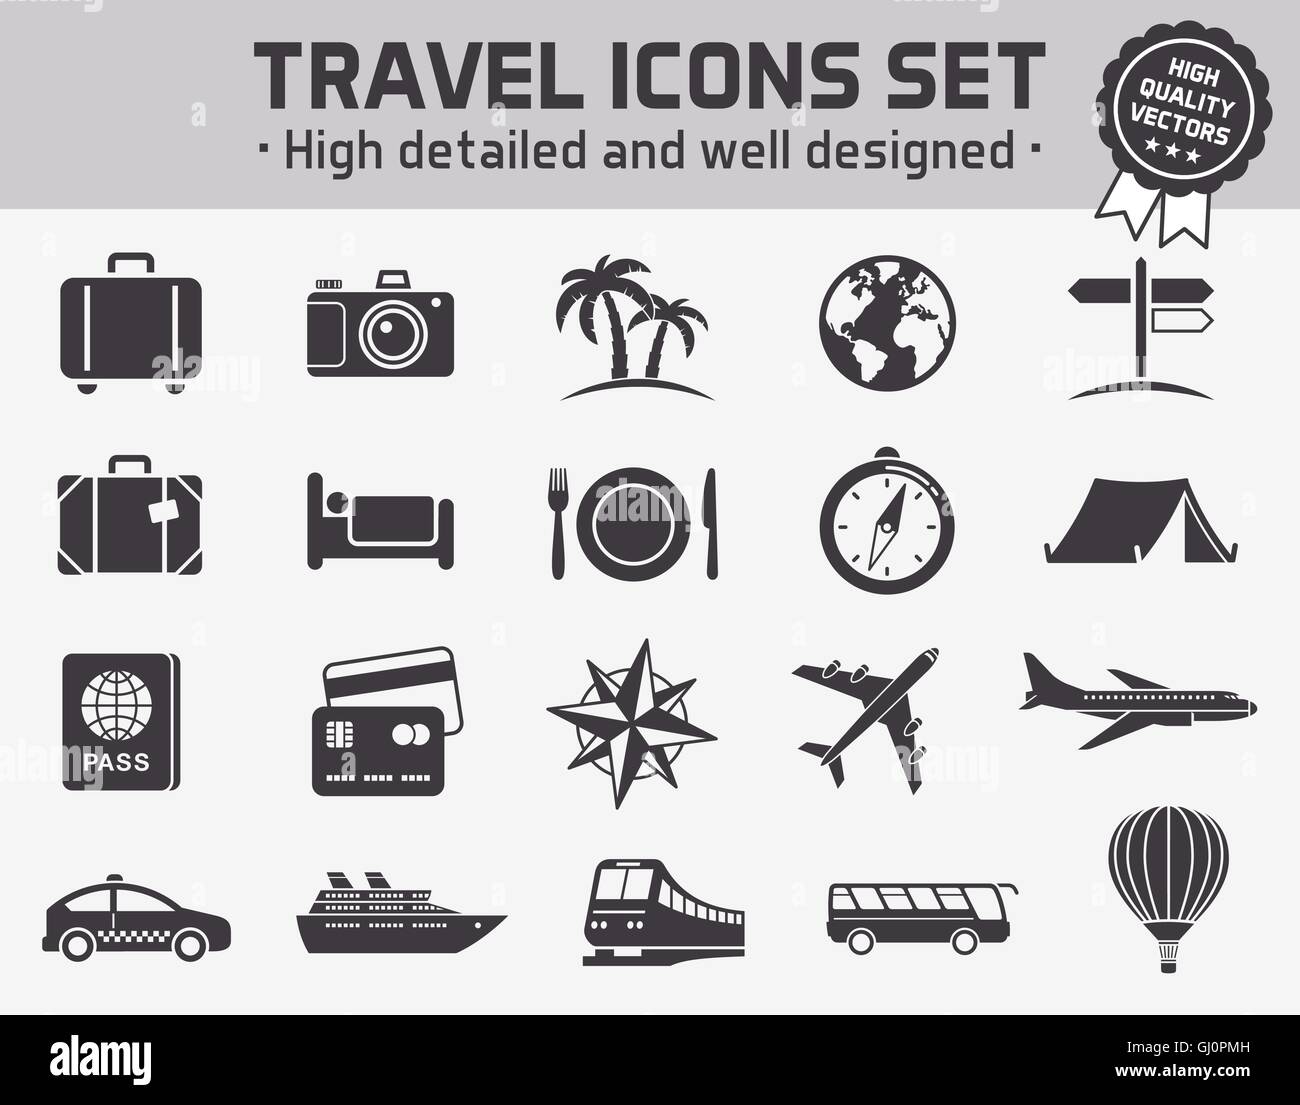 Collection of twenty high quality icons set for travel ant tourism Stock Vector